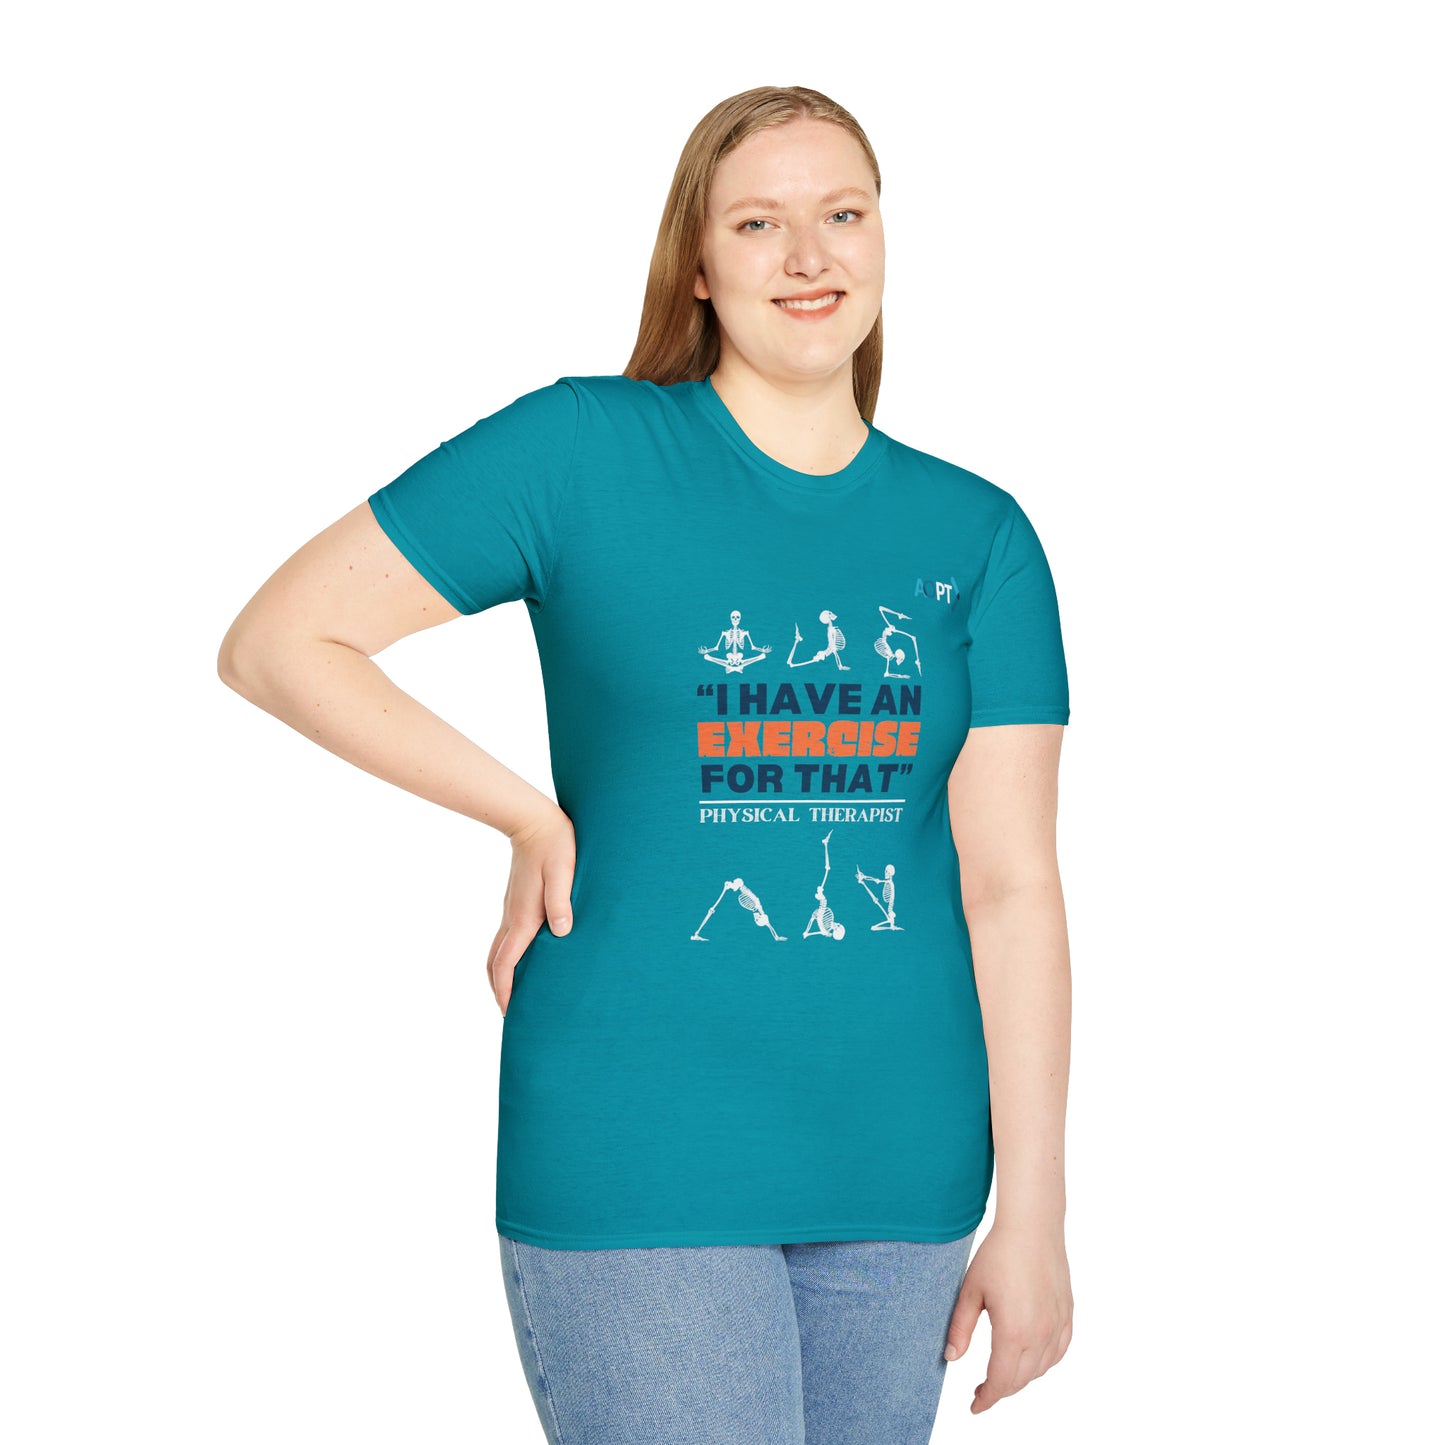 "I Have An Exercise" T-Shirt